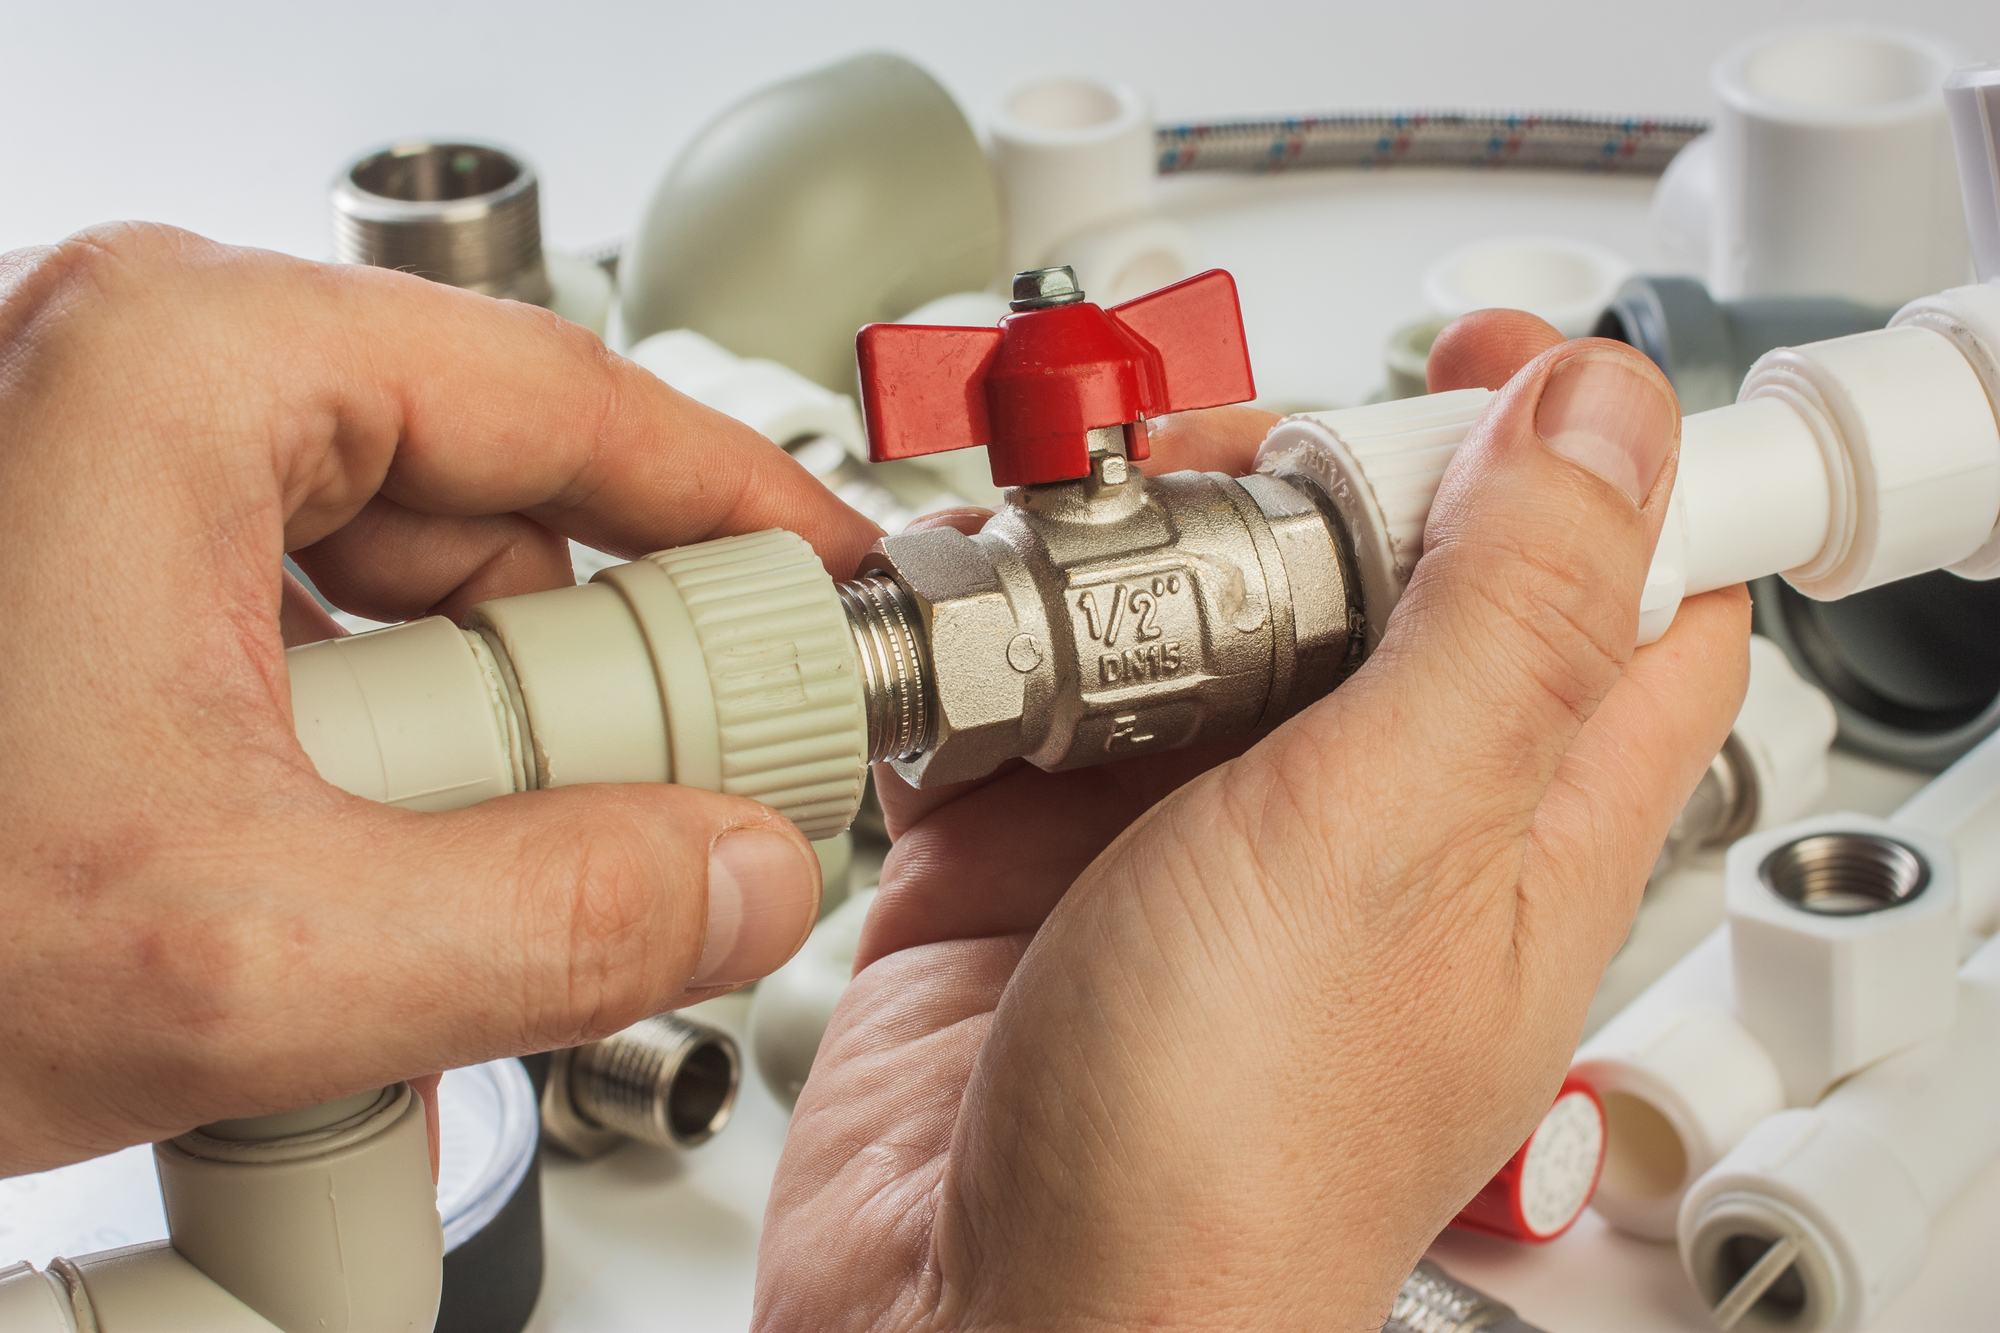 Identifying and fixing backed up plumbing in your home